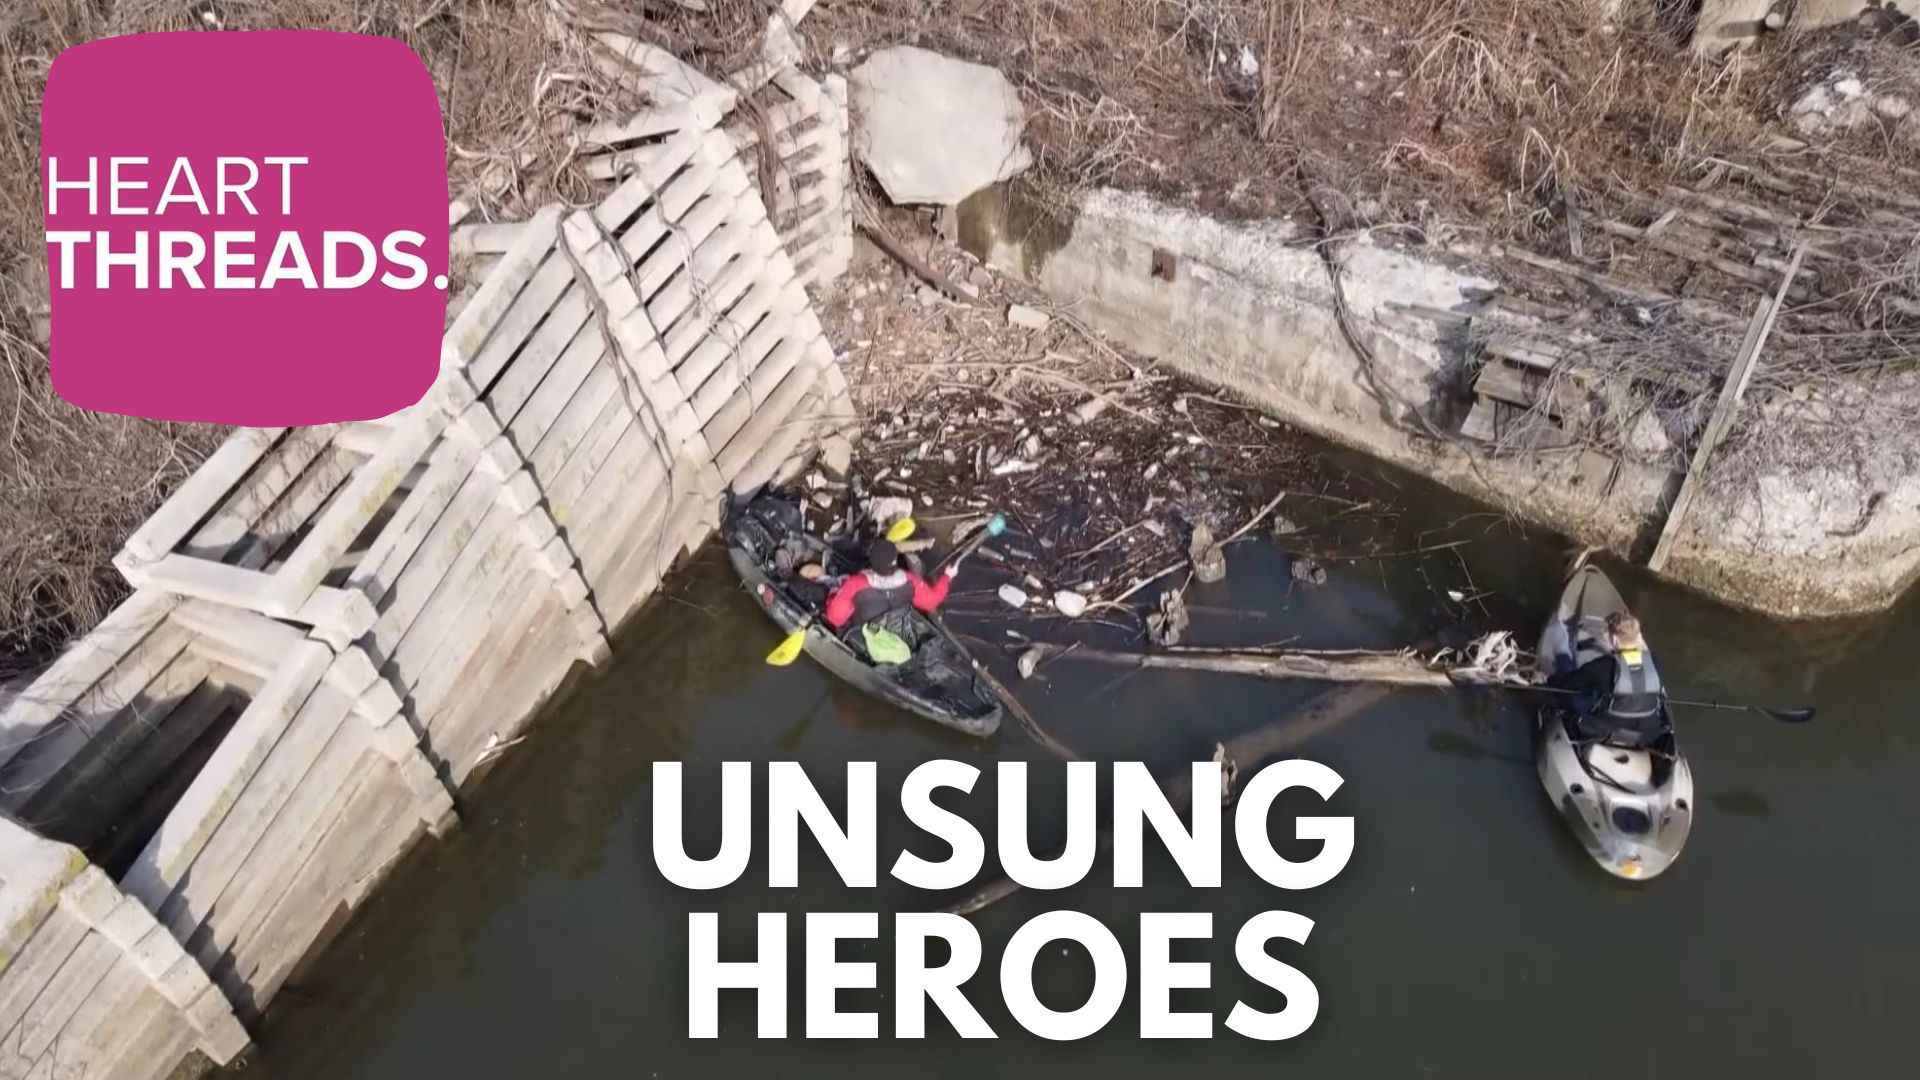 There are people out in the world trying to make day's brighter and the earth a better place. These stories highlight unsung heroes contributing to their community.